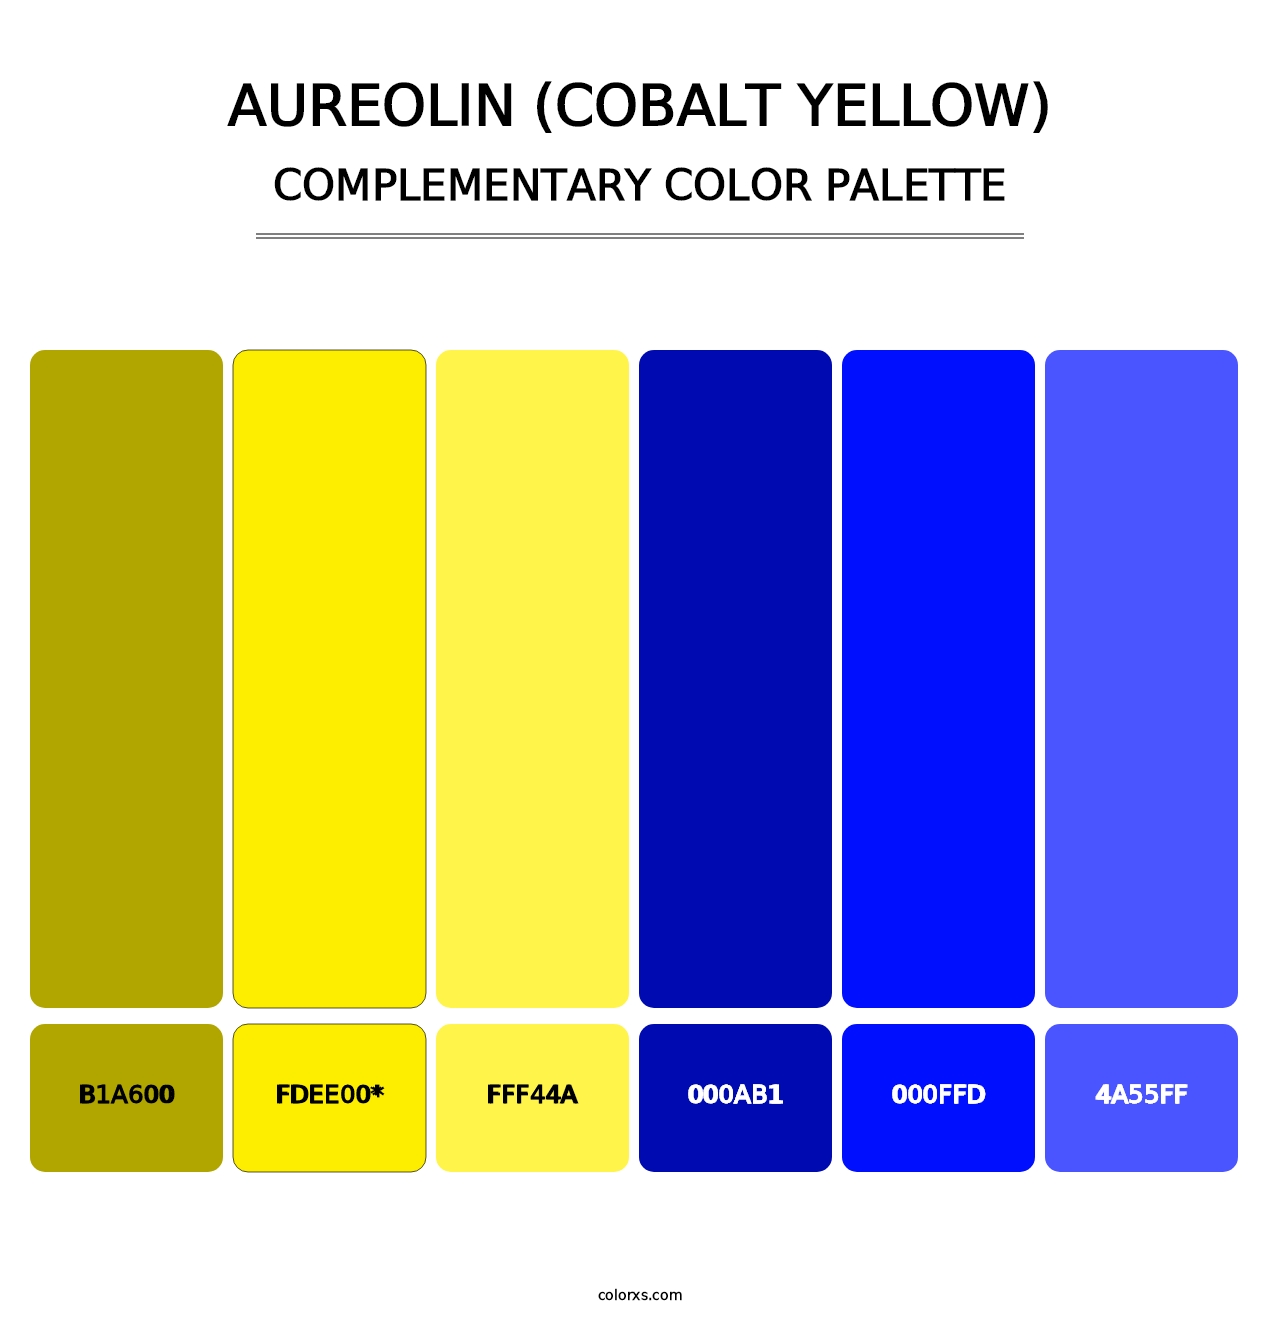 Aureolin (Cobalt Yellow) - Complementary Color Palette